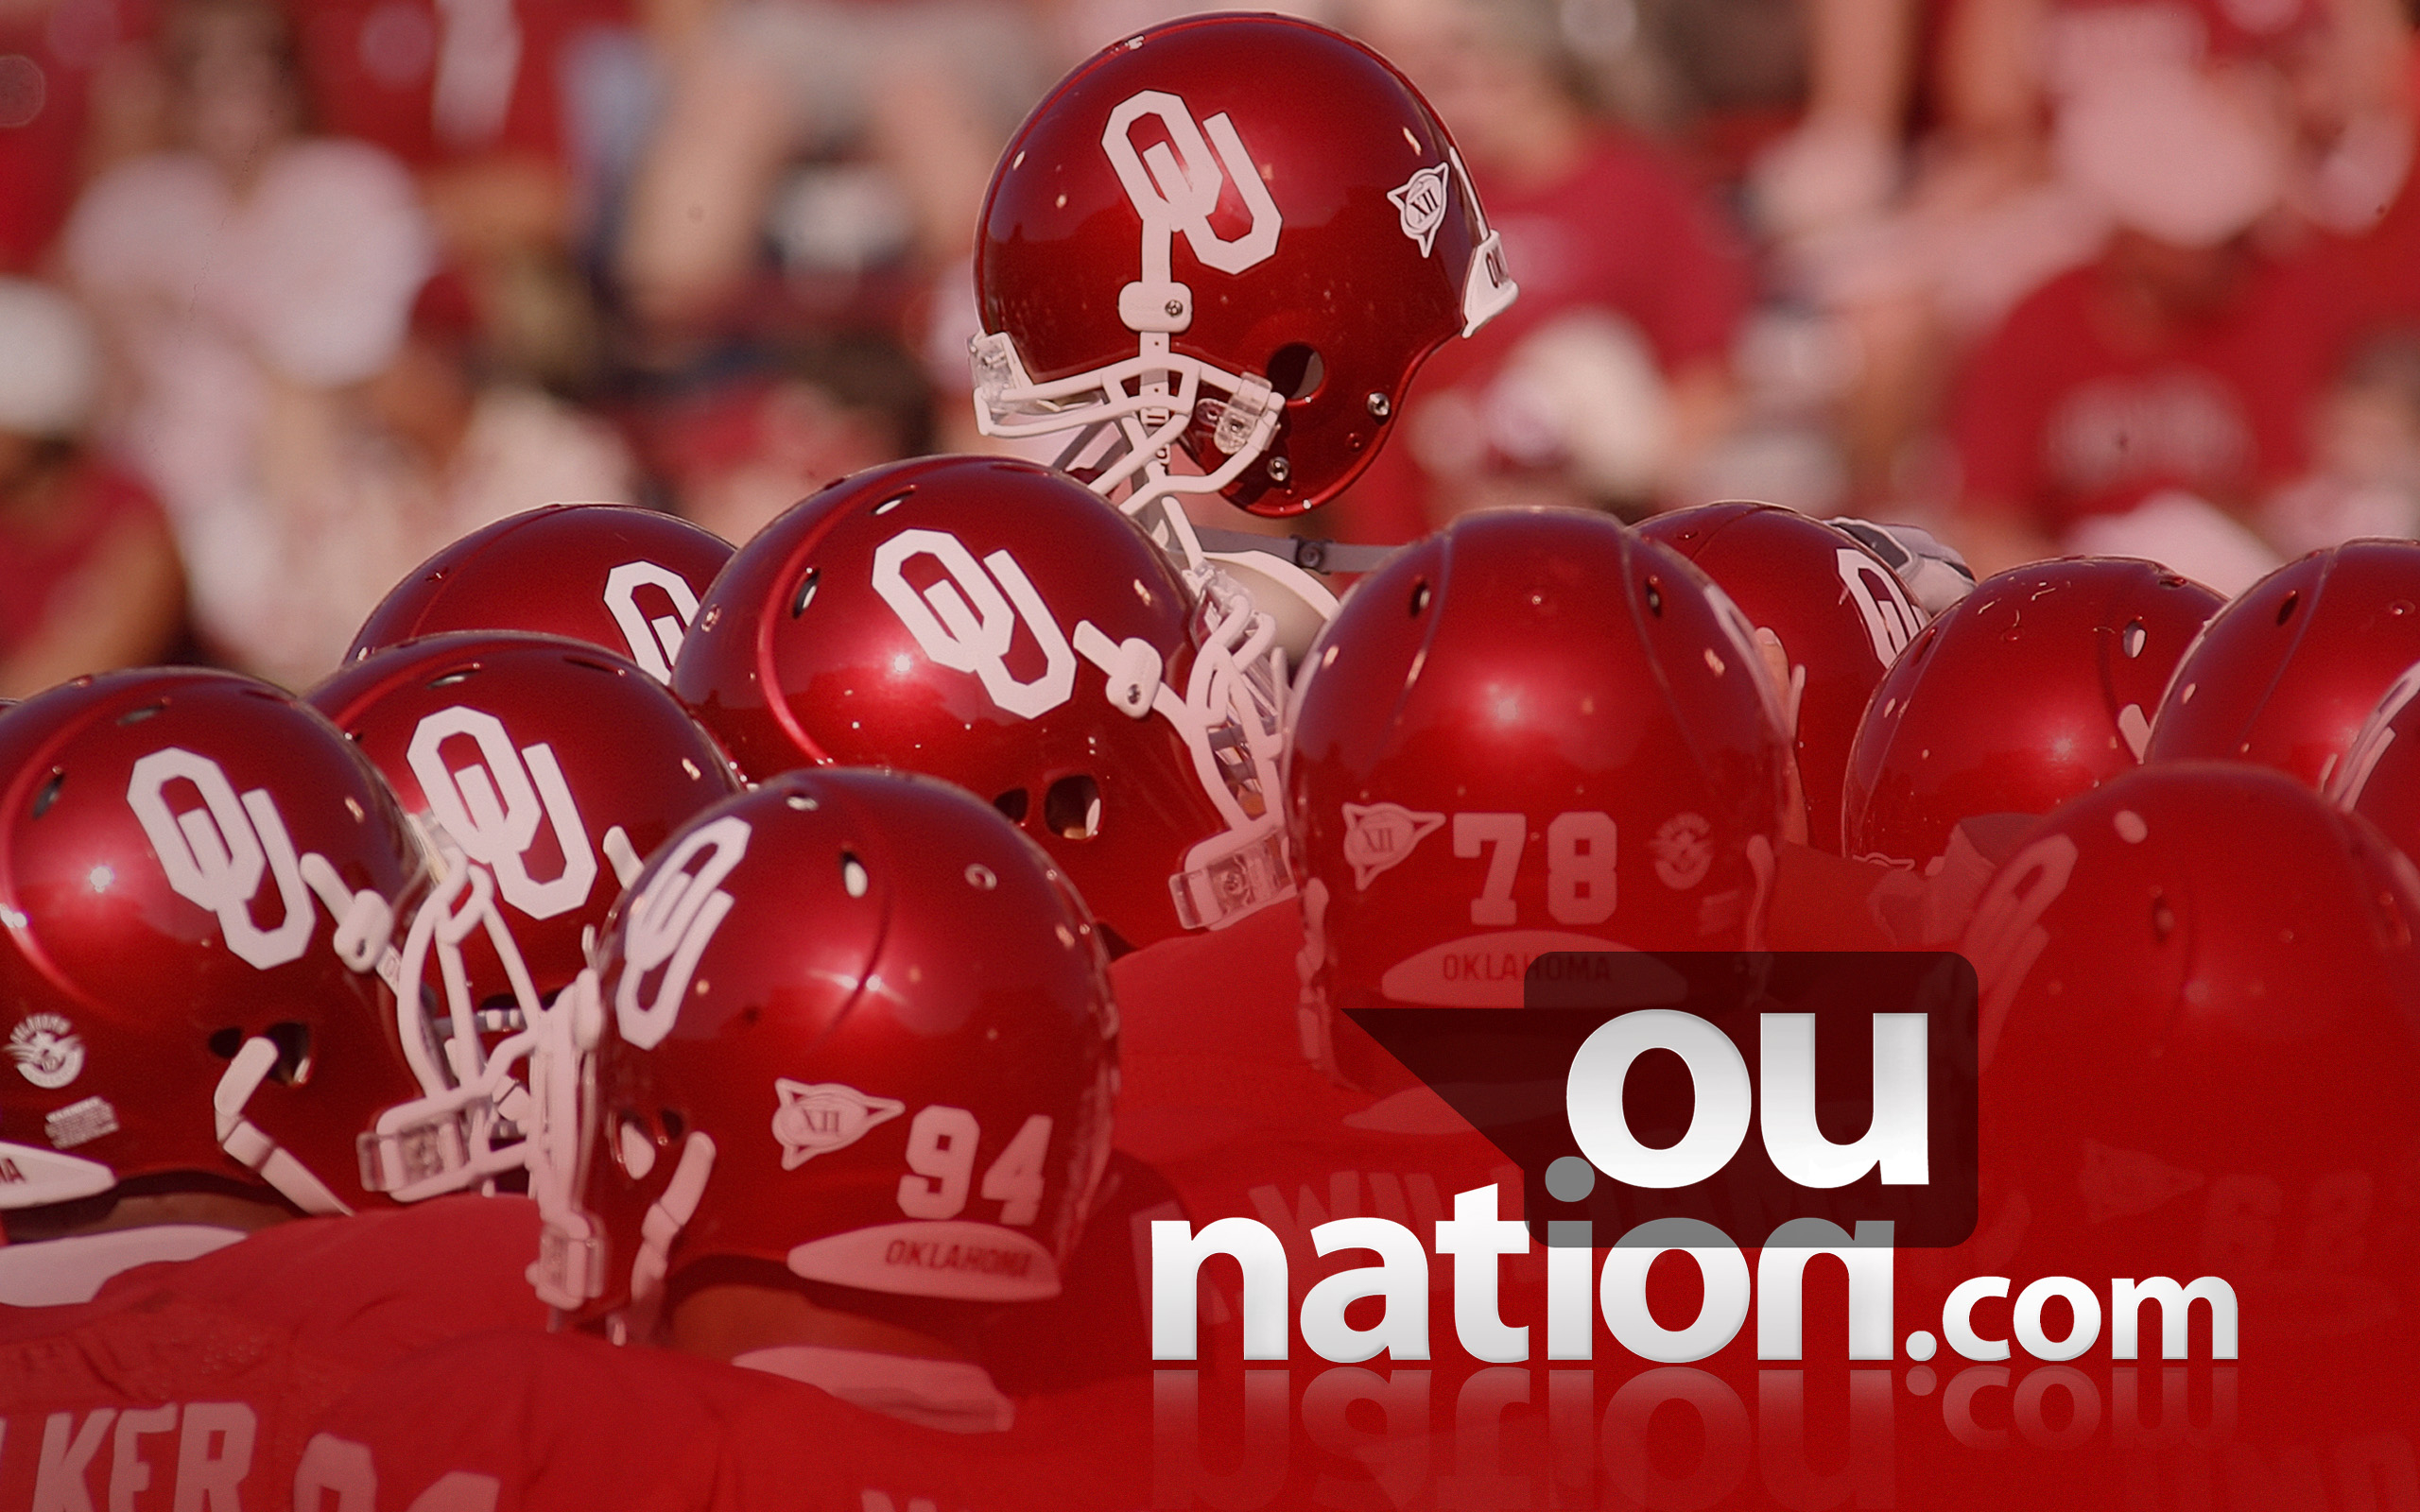 2560x1600 | University of Oklahoma Themed Wallpapers Free for Download